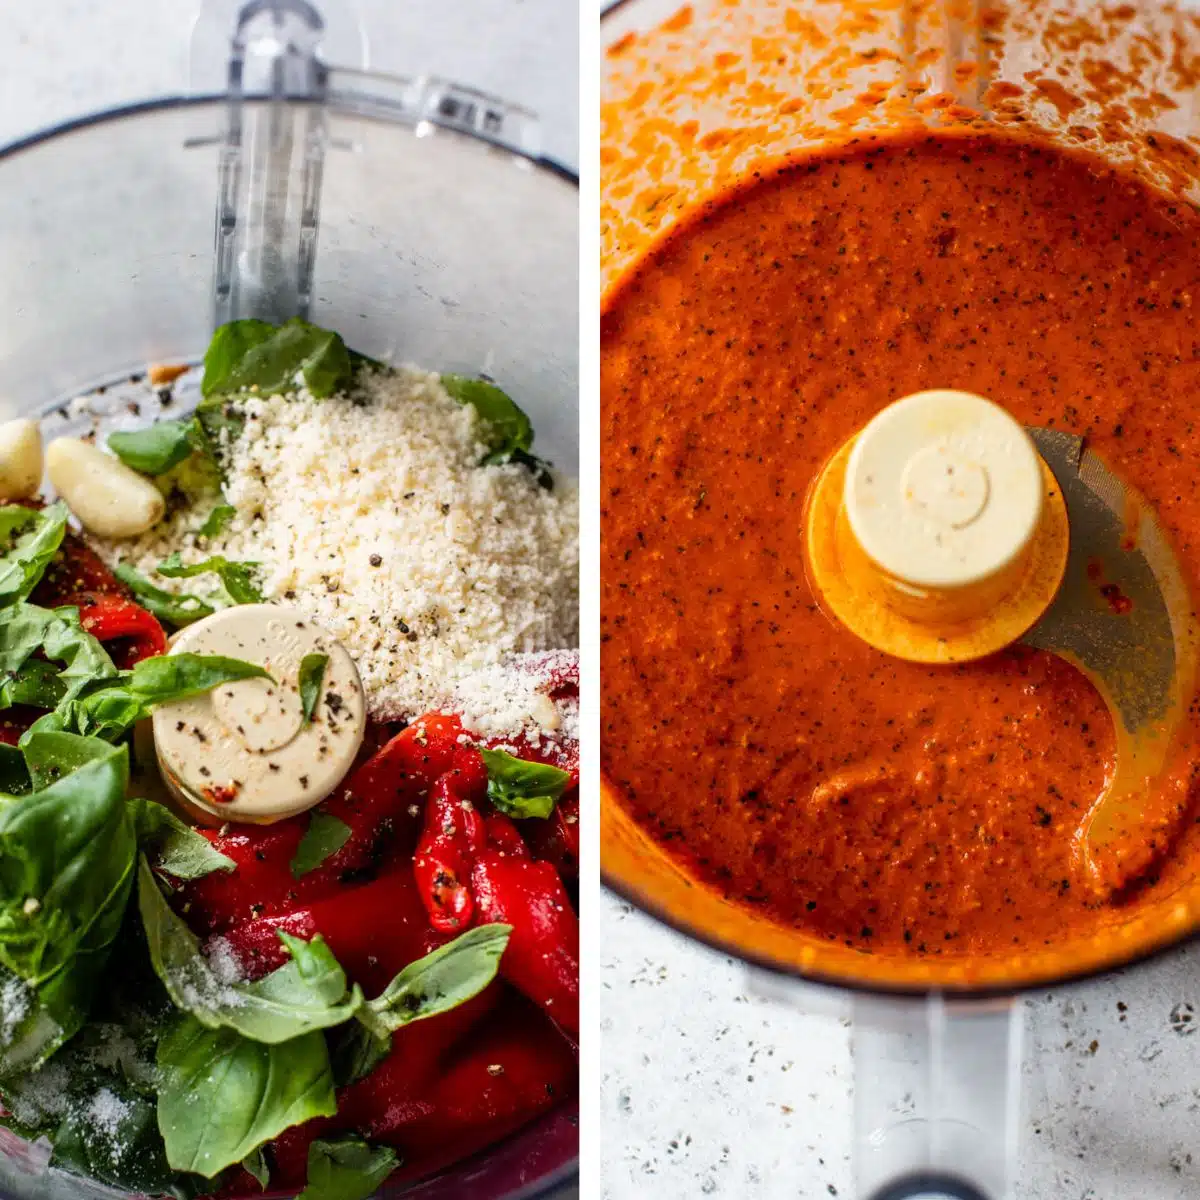 2 images: the left image shows all ingredients added to a food processor and the right image shows those ingredients blended together